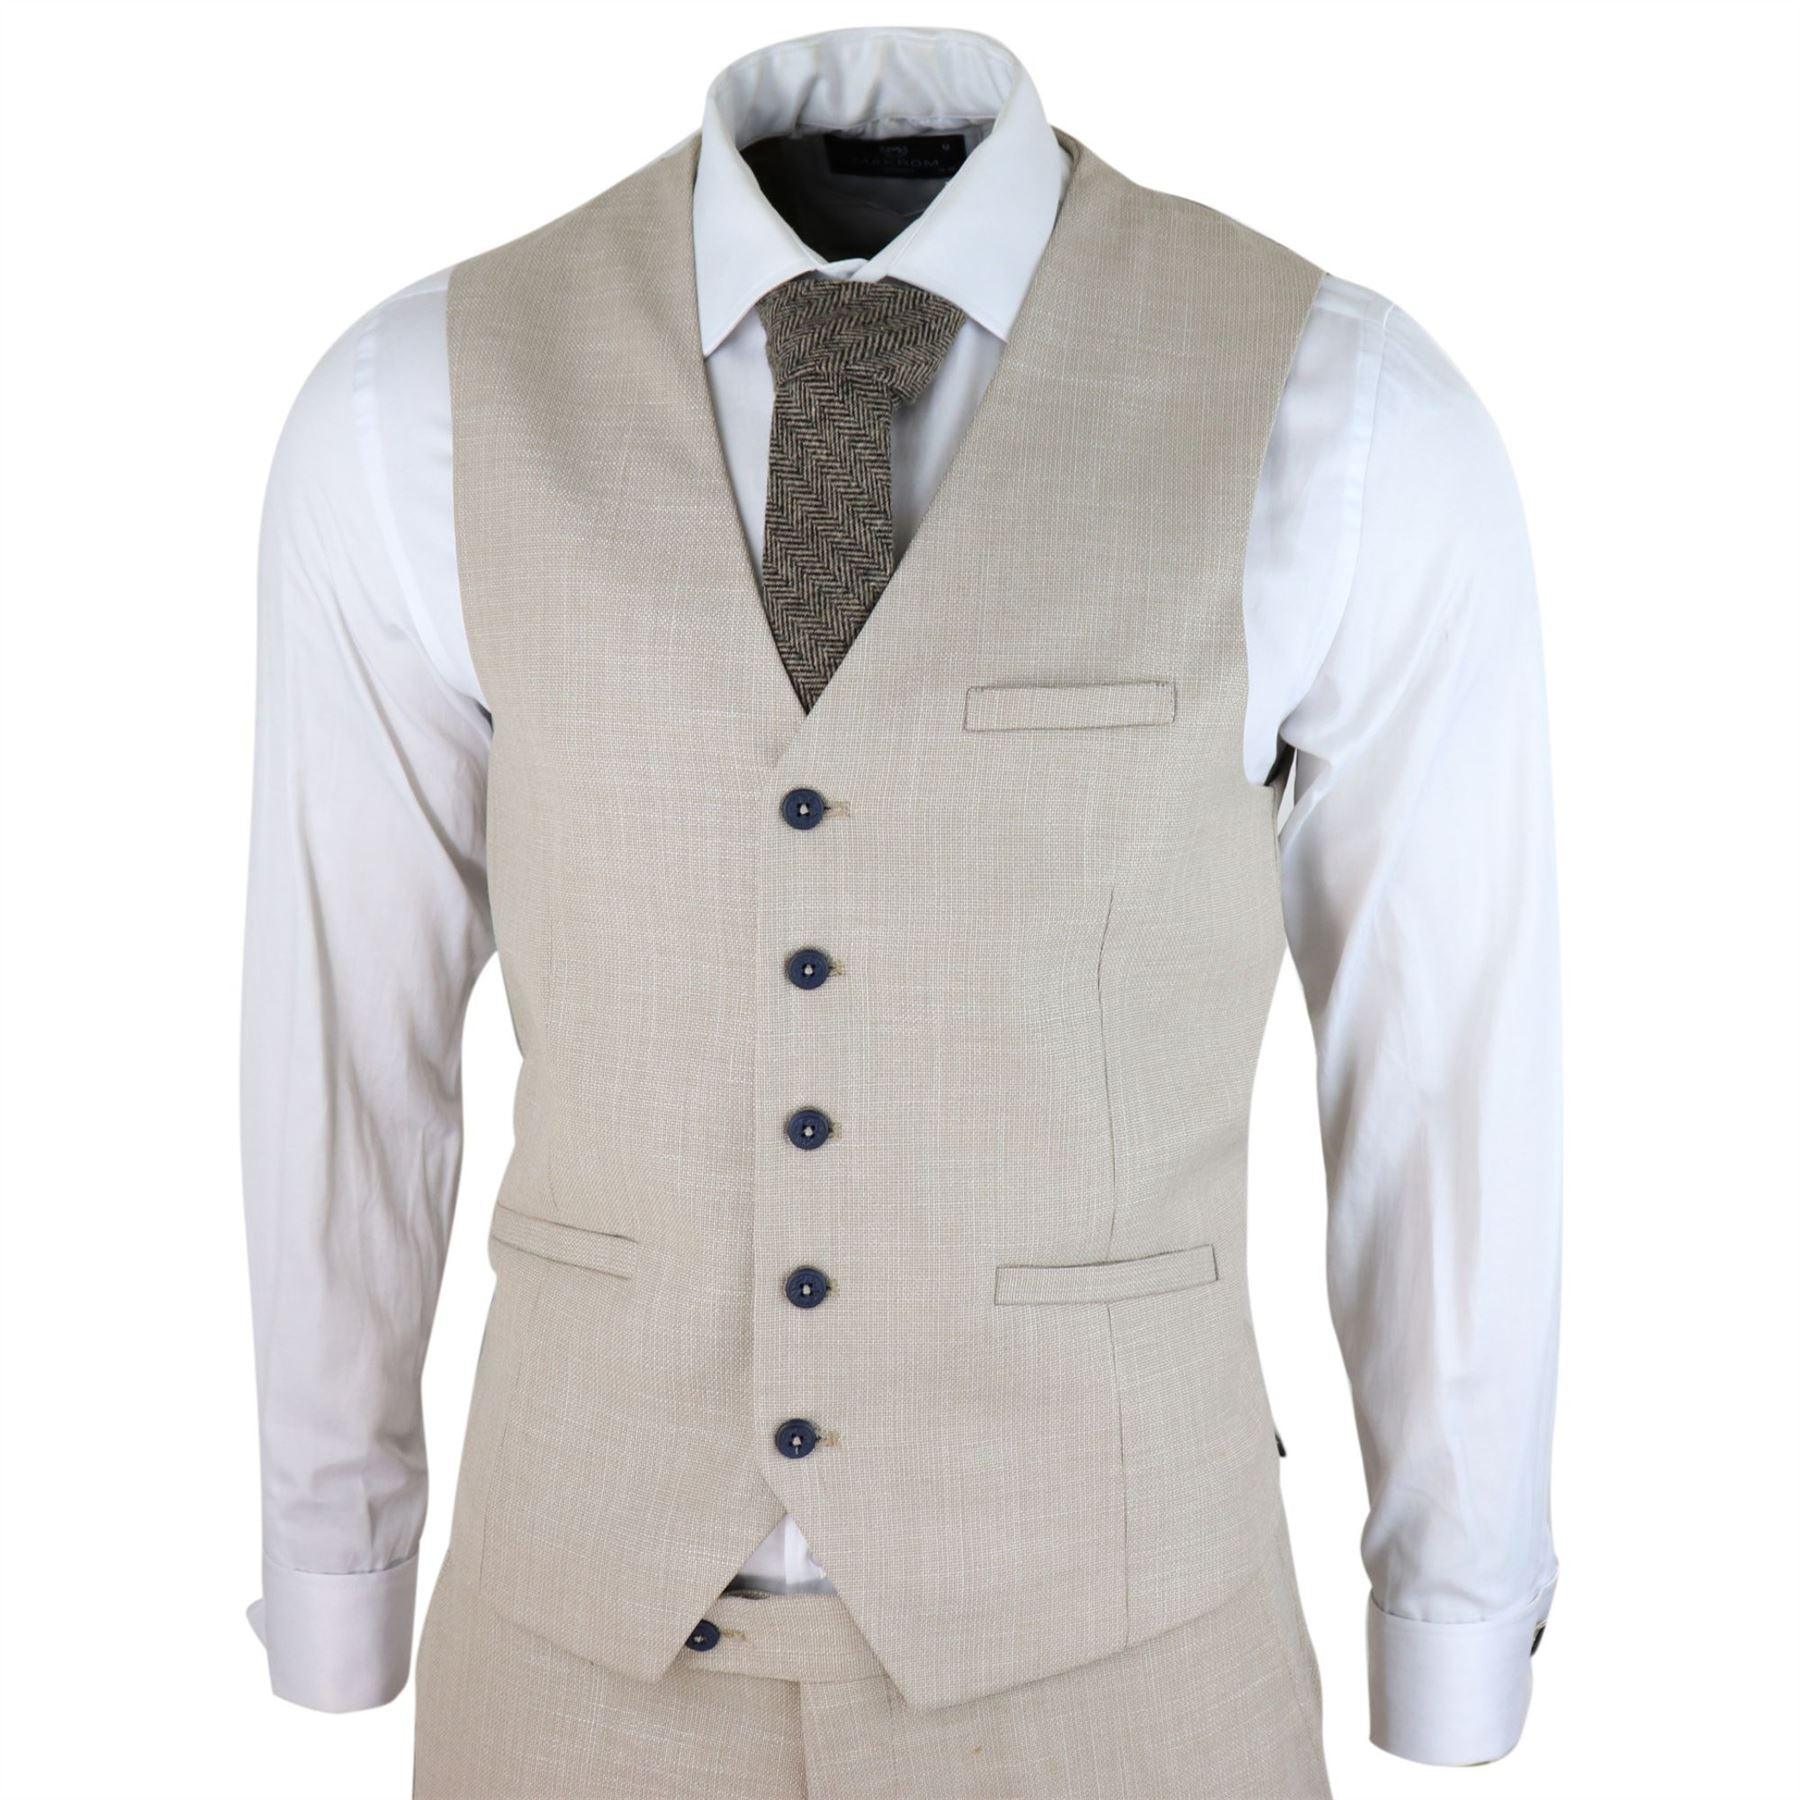 Mens 3 Piece Suit Linen Beige Cream 2 Button Tailored Fit Classic Retro - Knighthood Store